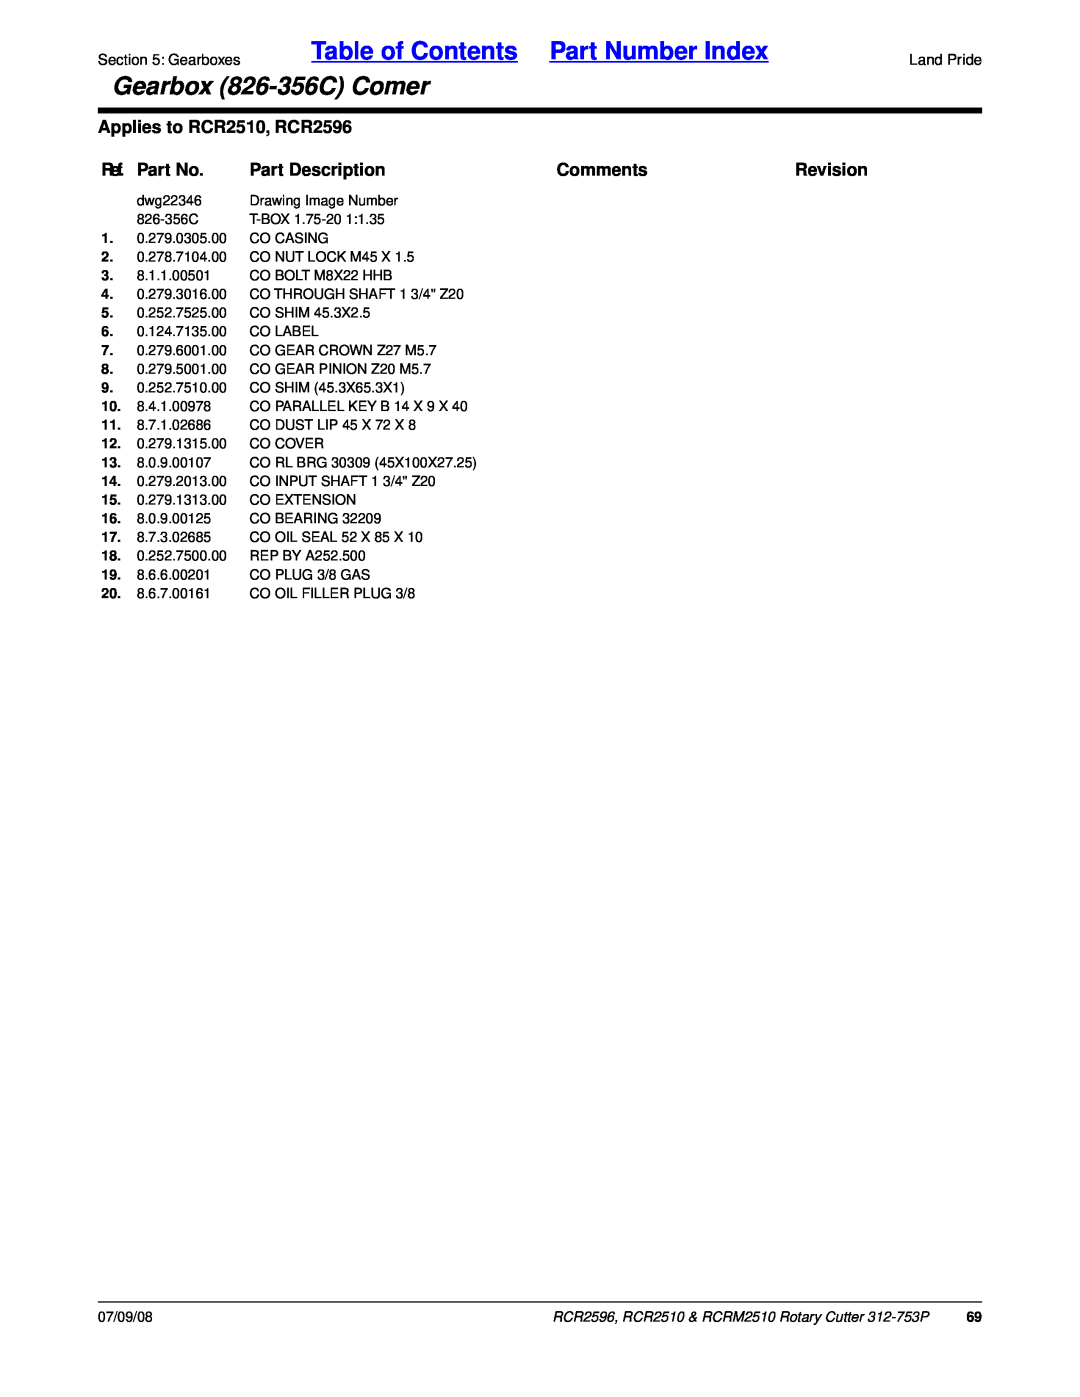 Land Pride manual Table of Contents Part Number Index, Gearbox 826-356CComer, Applies to RCR2510, RCR2596, Ref. Part No 